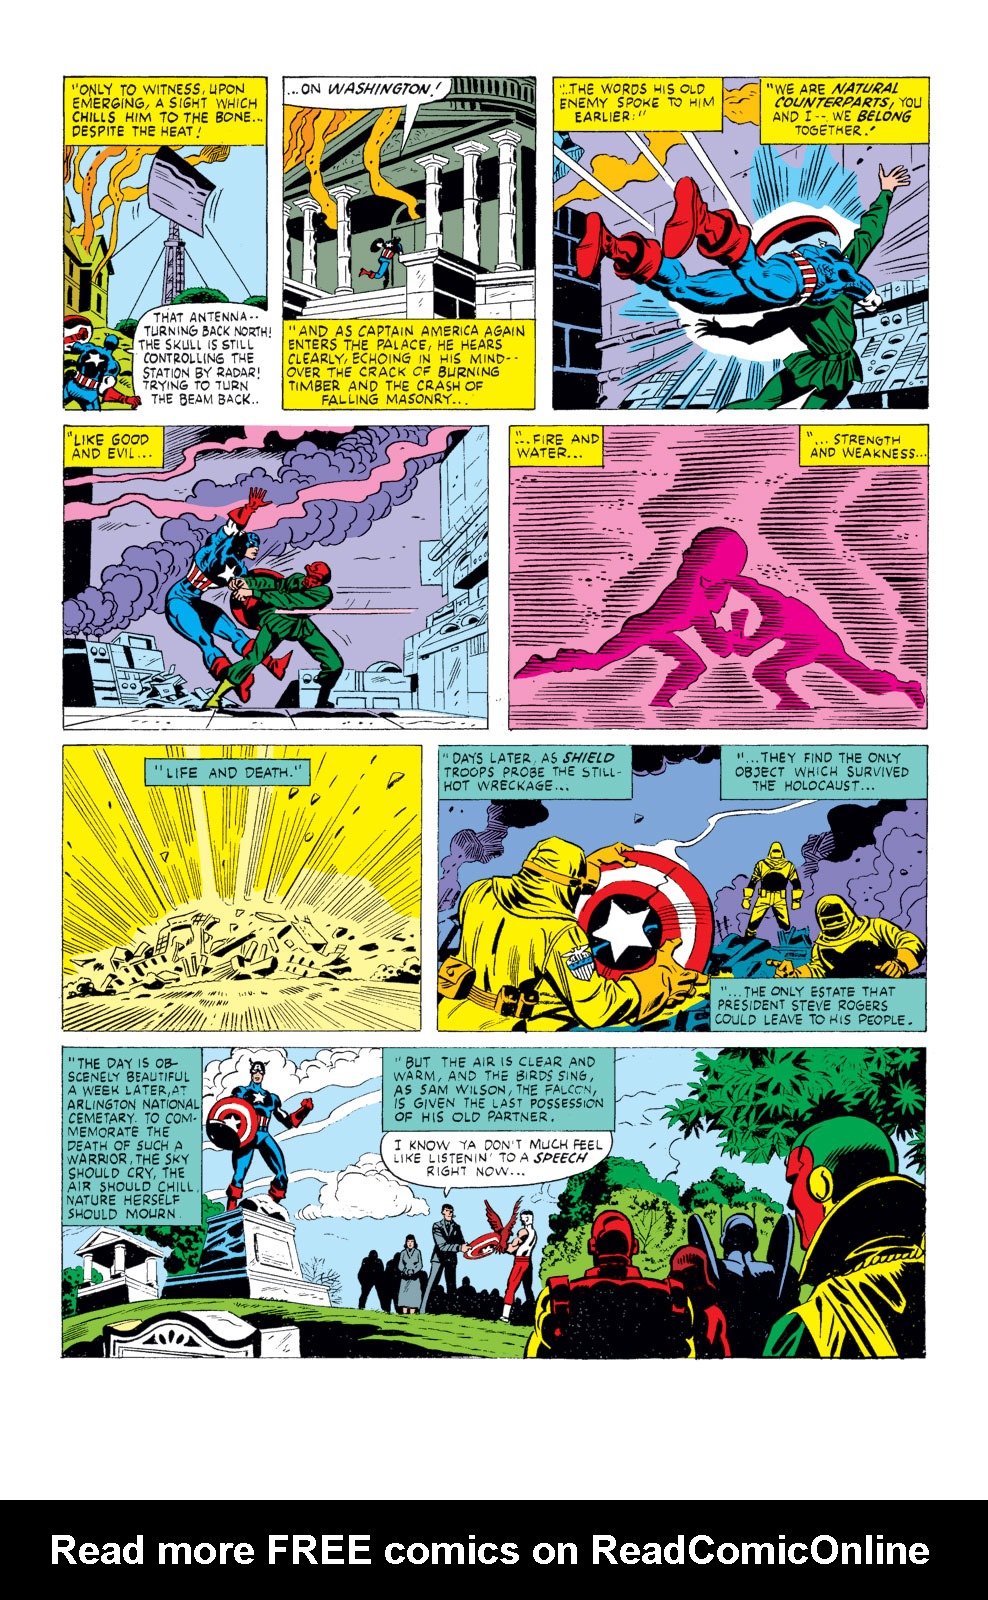 What If? (1977) issue 26 - Captain America had been elected president - Page 20